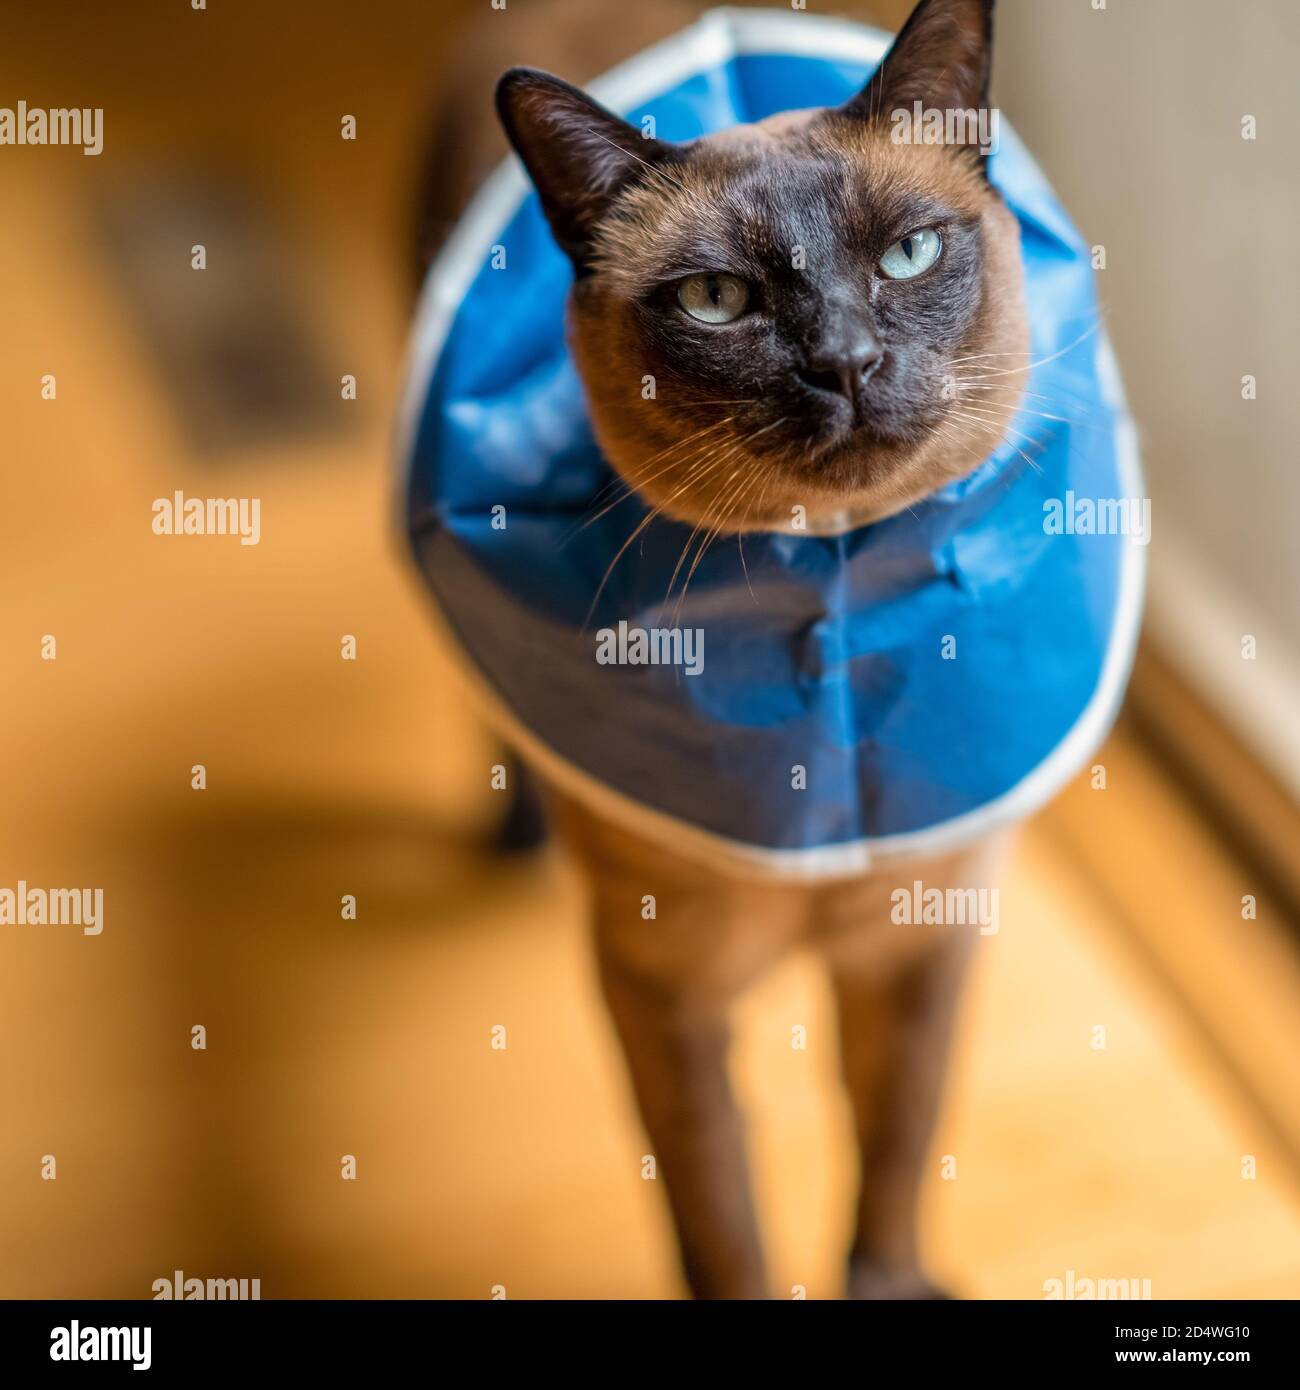 Tokinese cat with cone of shame Stock Photo